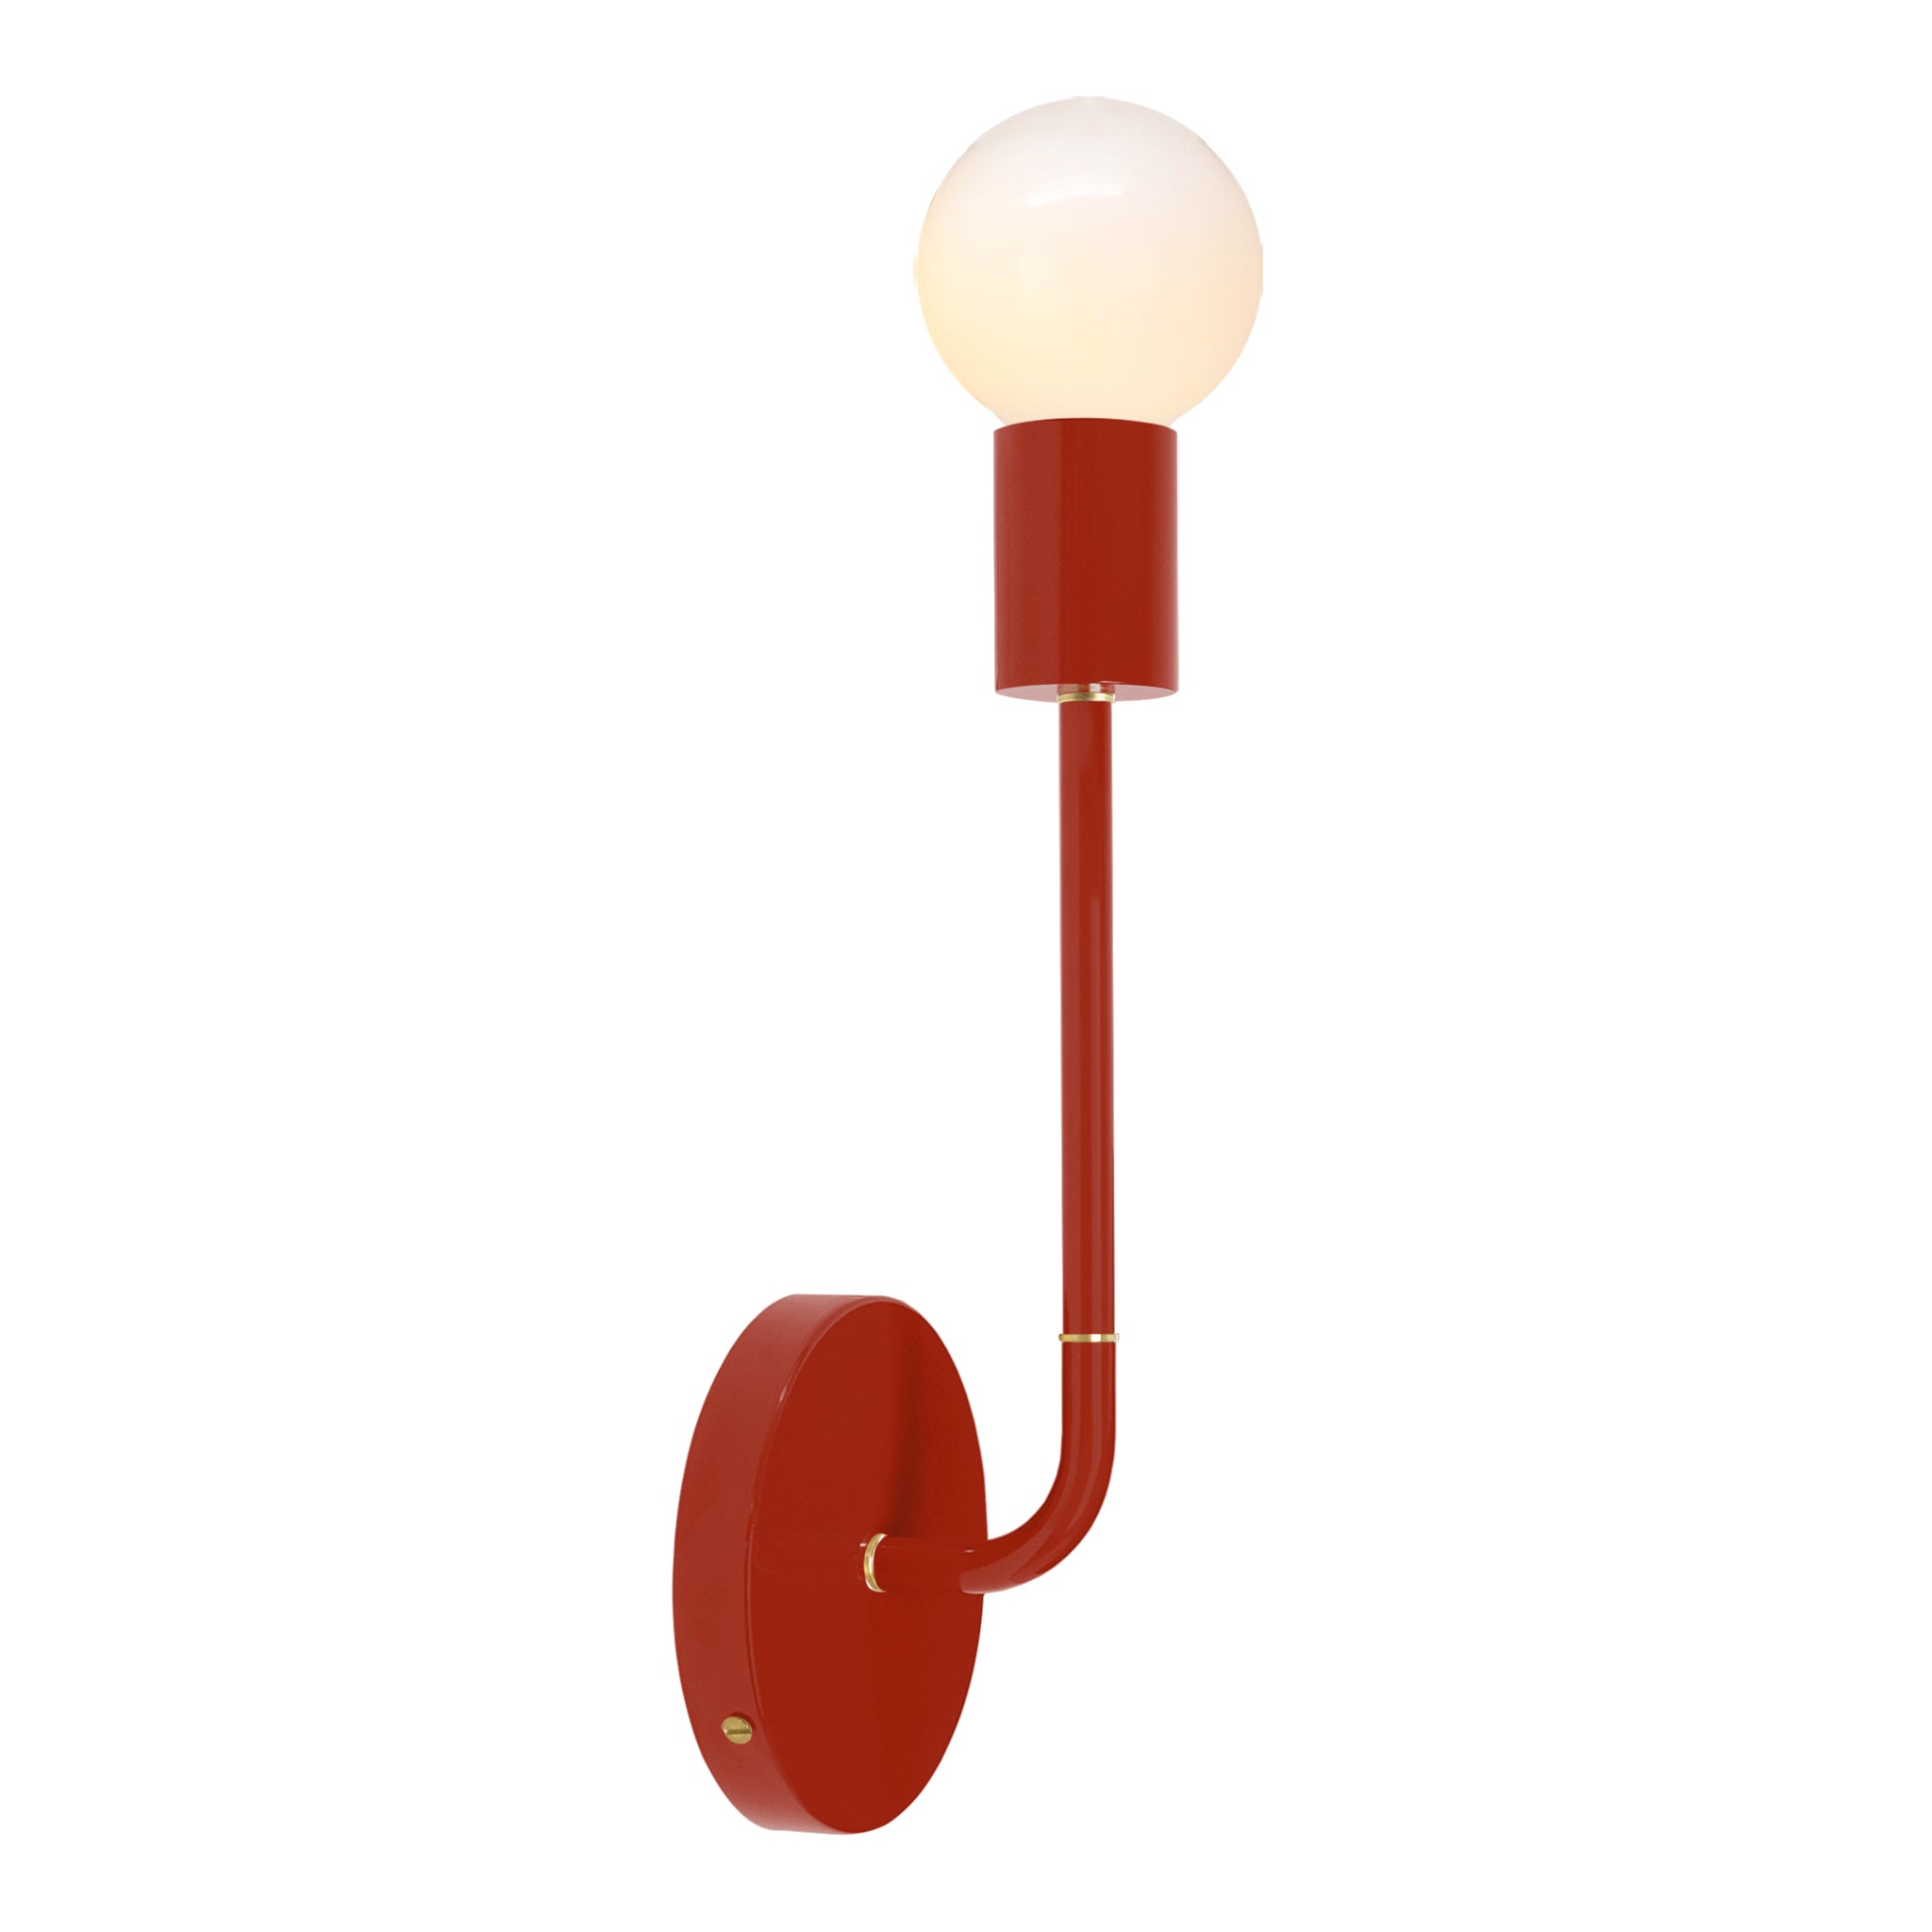 Brass and riding hood red color Tall Snug sconce Dutton Brown lighting